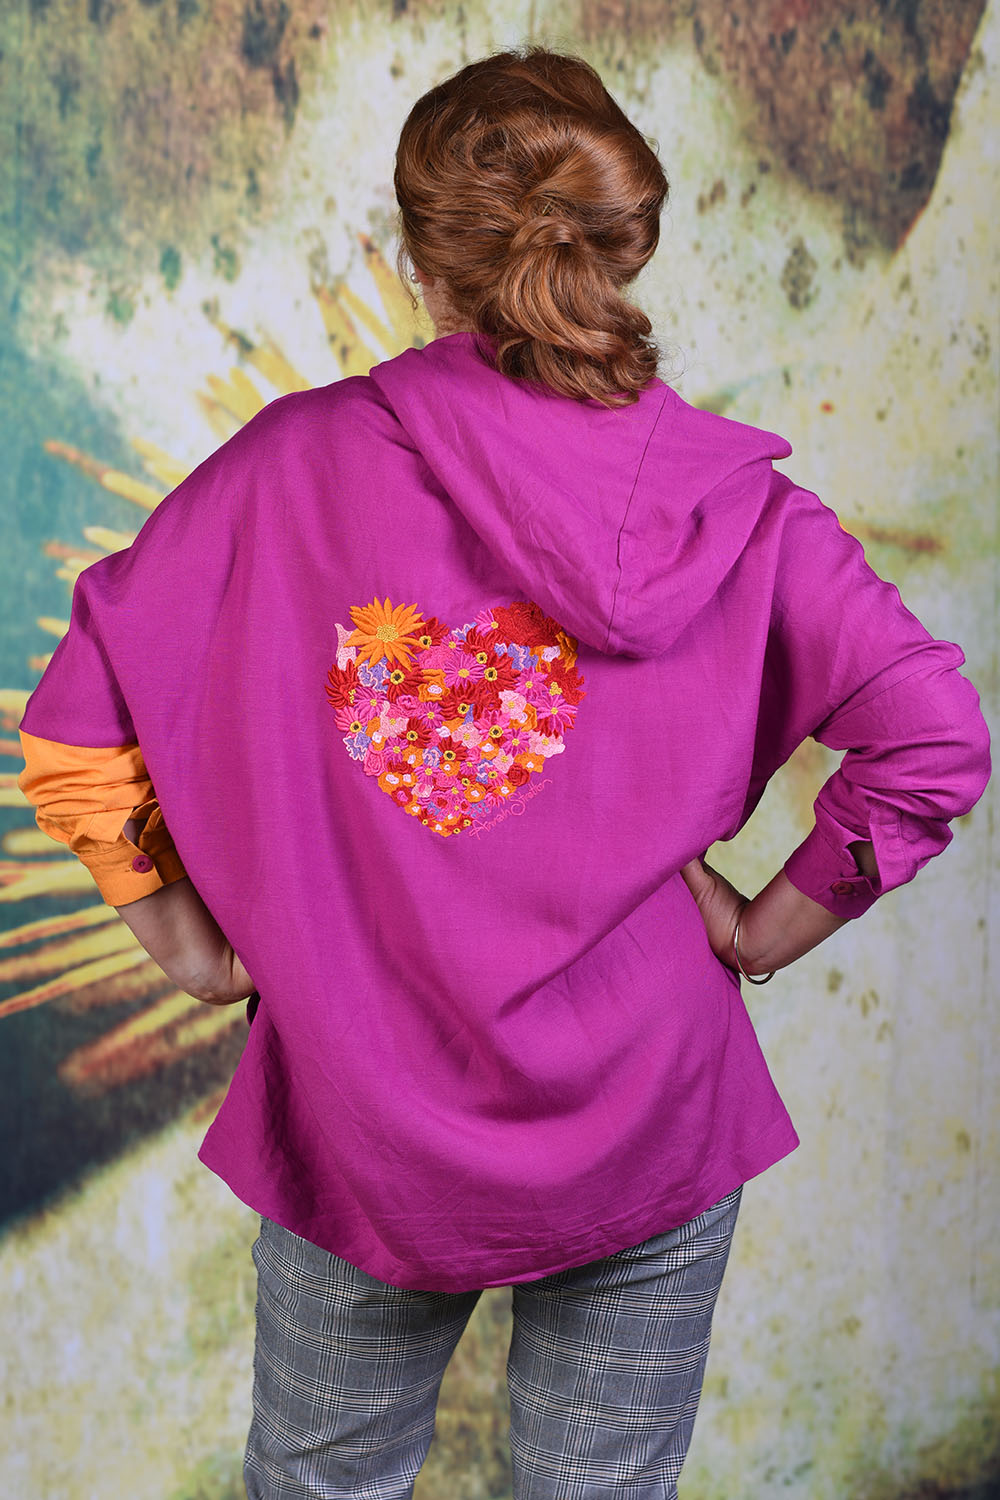 Back of Annah Stretton Periwinkle shirt showing a floral pink and red heart embellishment